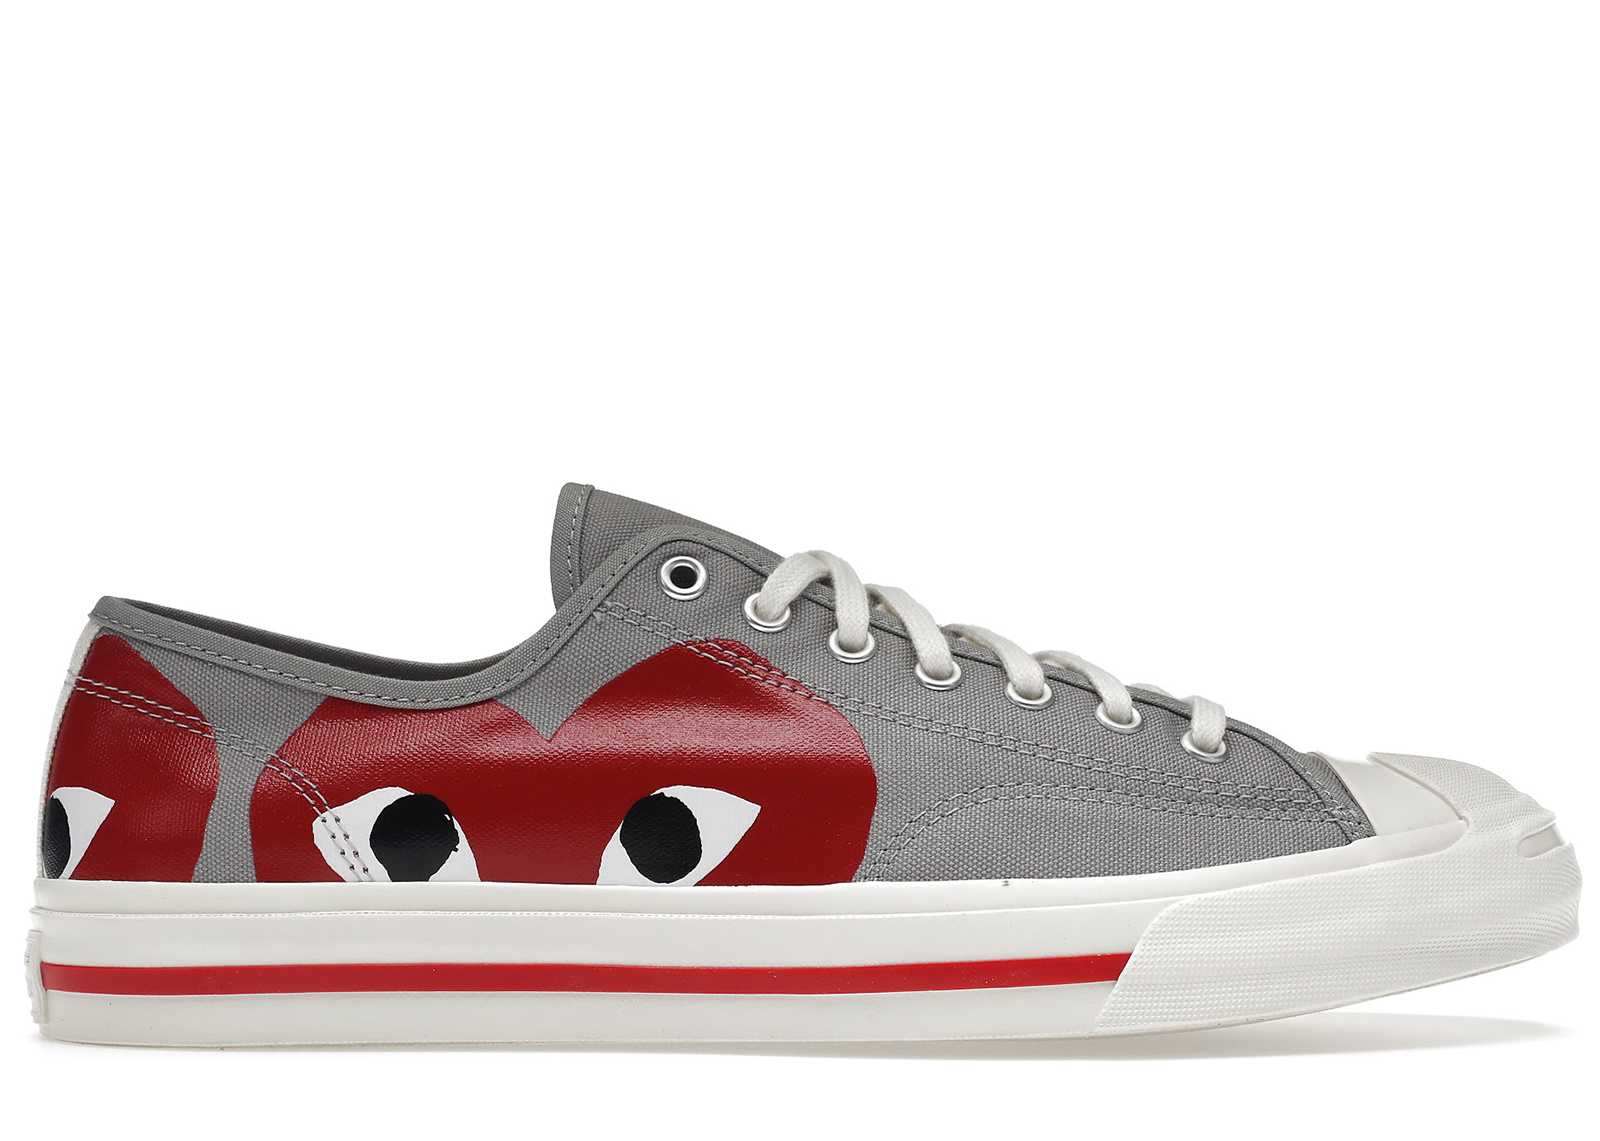 Converse Jack Purcell Comme des Garcons PLAY Grey Red Men's